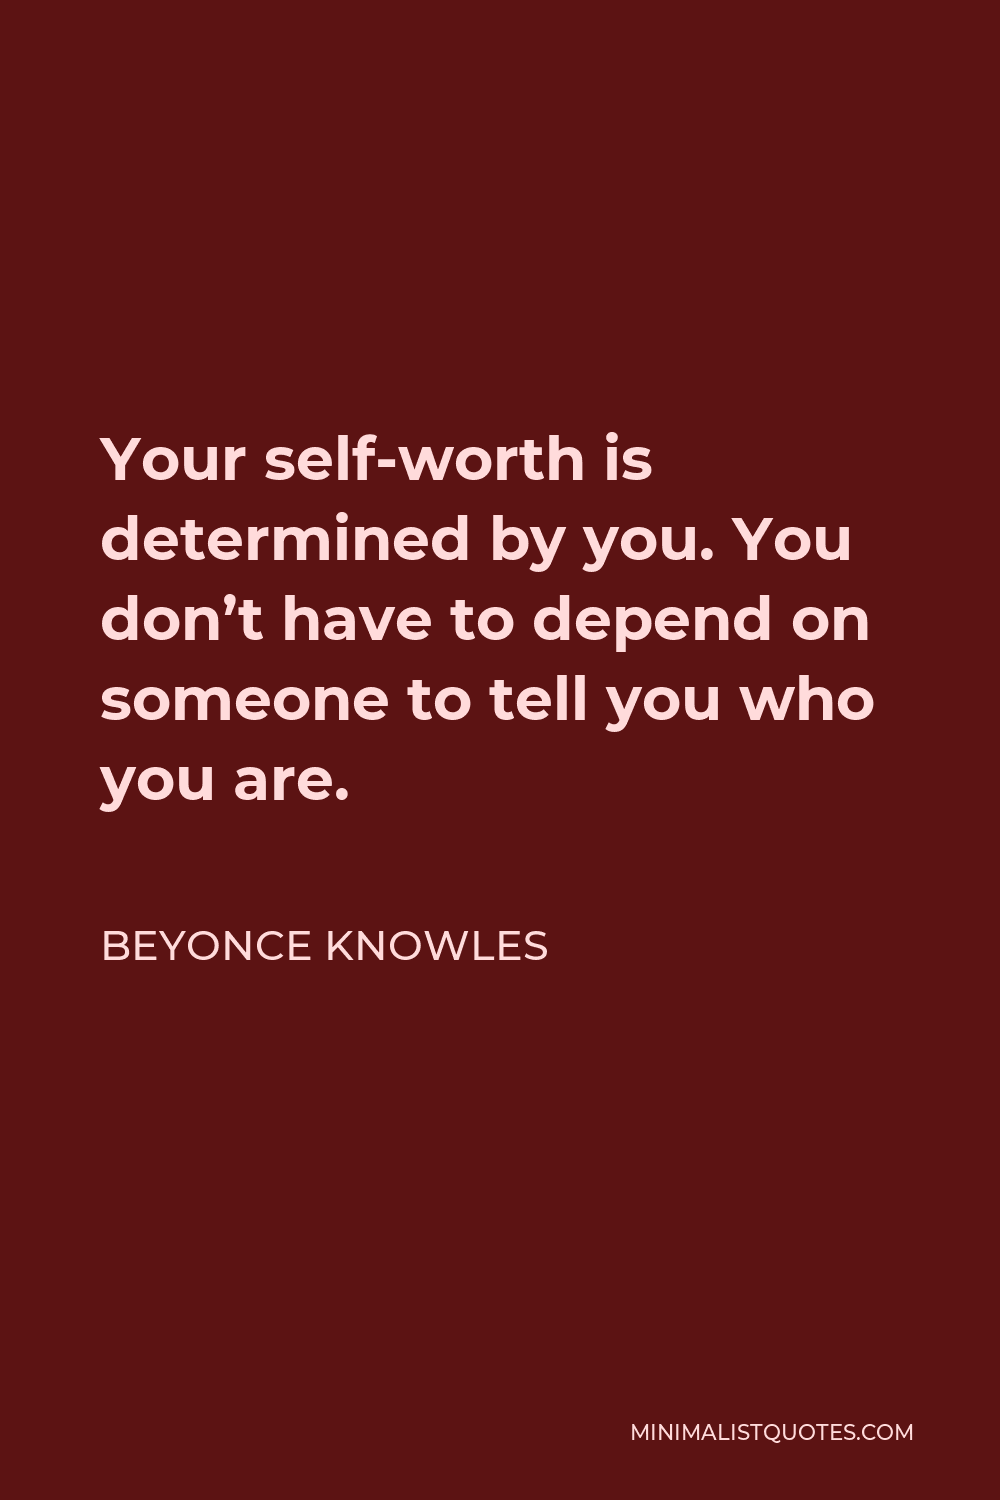 Beyonce Knowles Quote: Your self-worth is determined by you. You don't ...